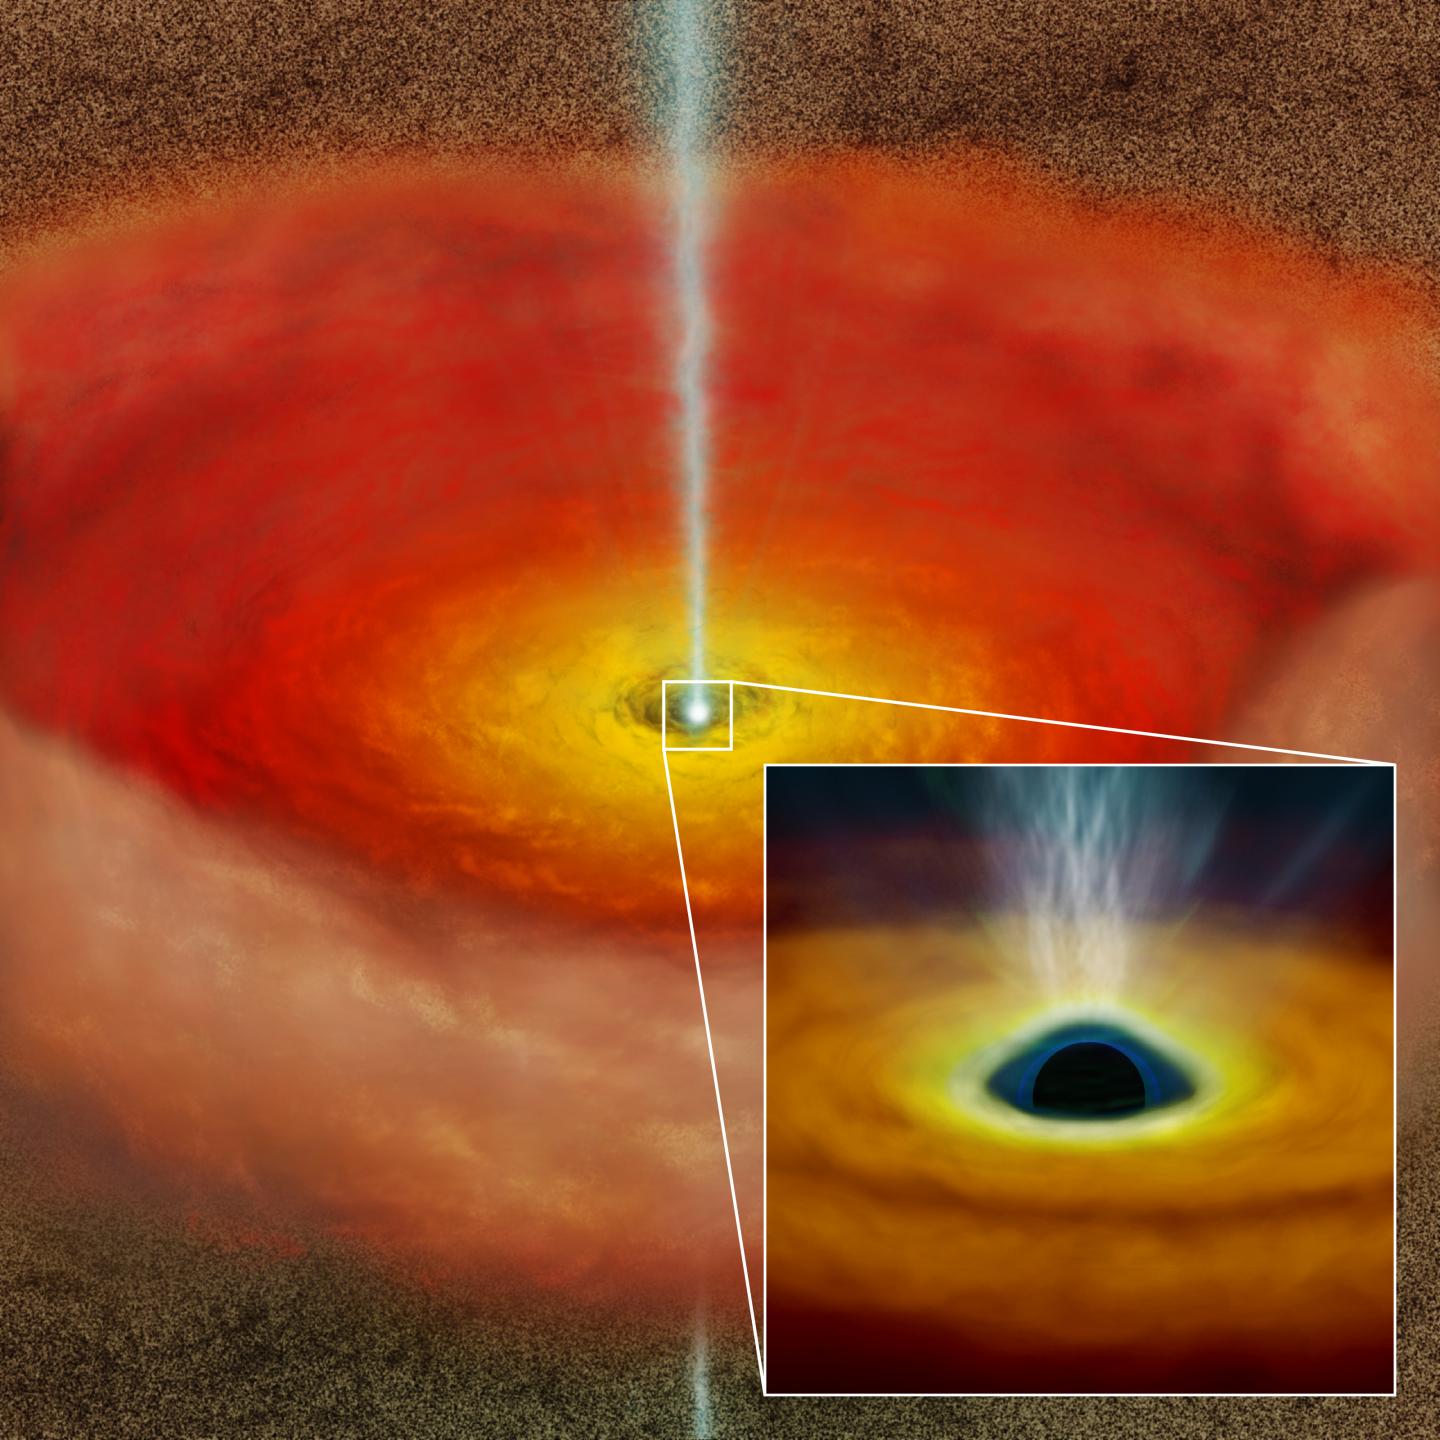 This Is An Artist's Conception of the Accretion Disk around a Spinning Super-Massive Black Hole